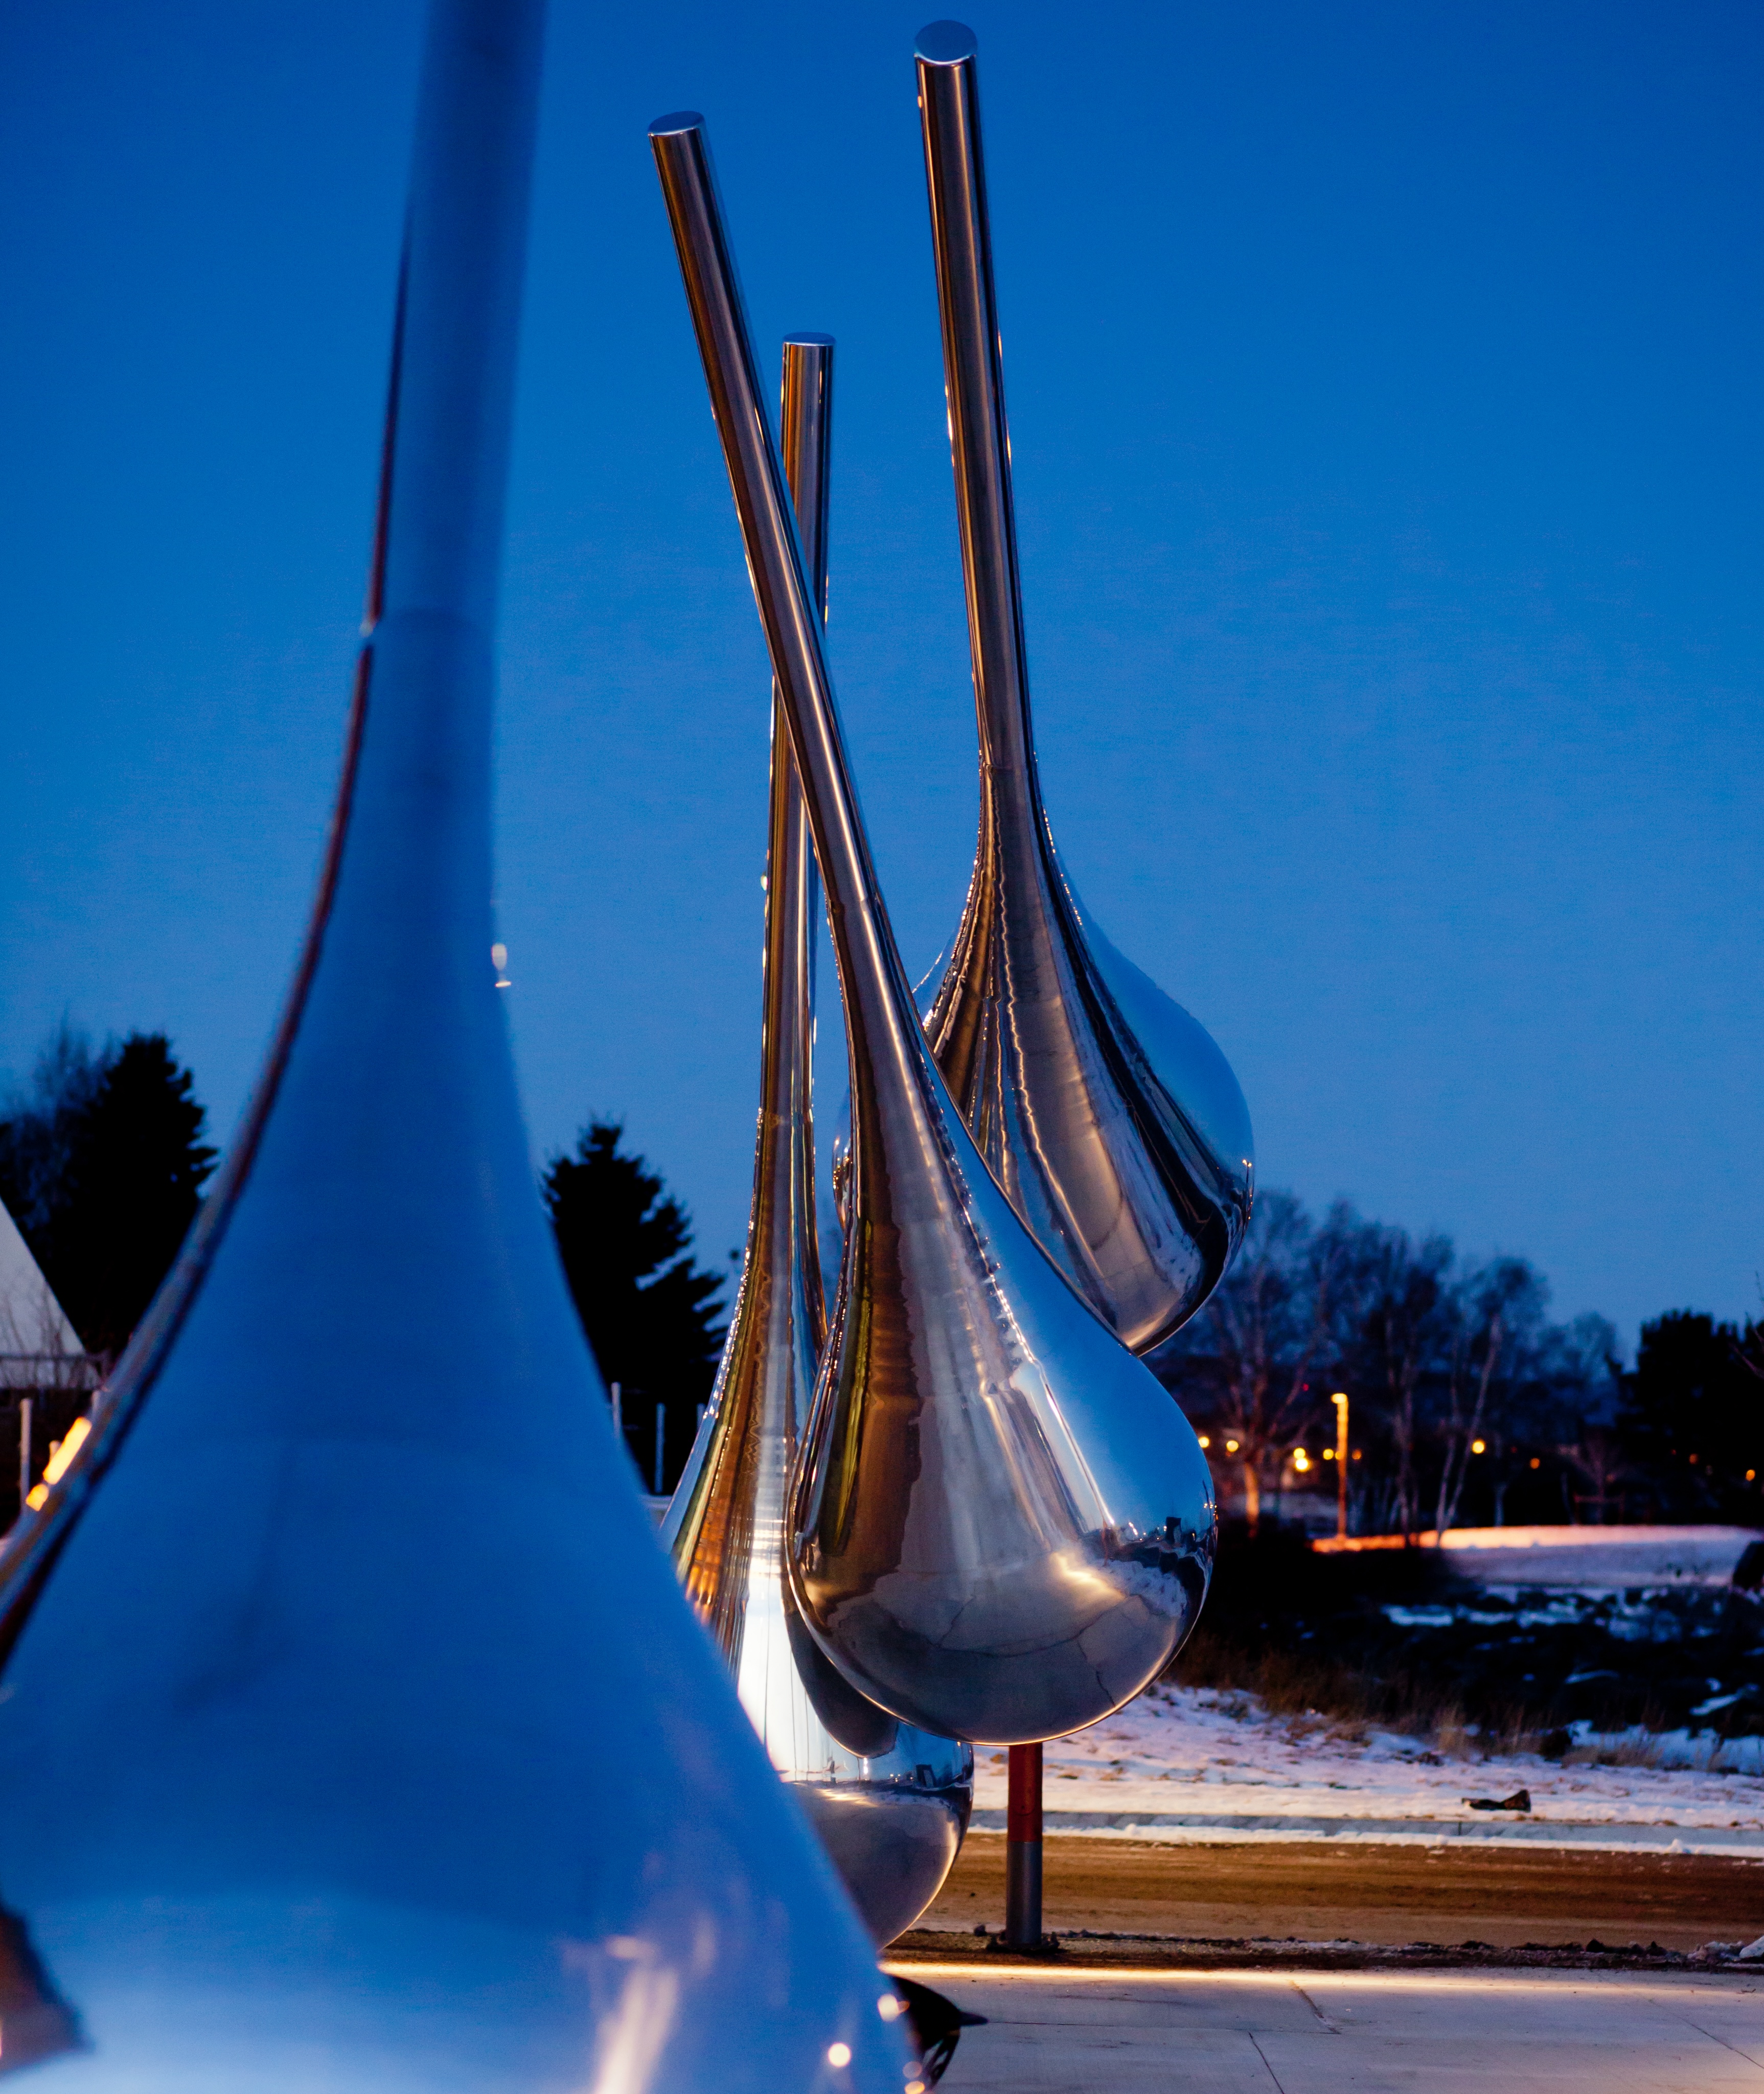 "Traveller's Return by Andy Davies; An art installation made up of a series of large, highly-polished metal water drops on display at Prince Arthur's Landing